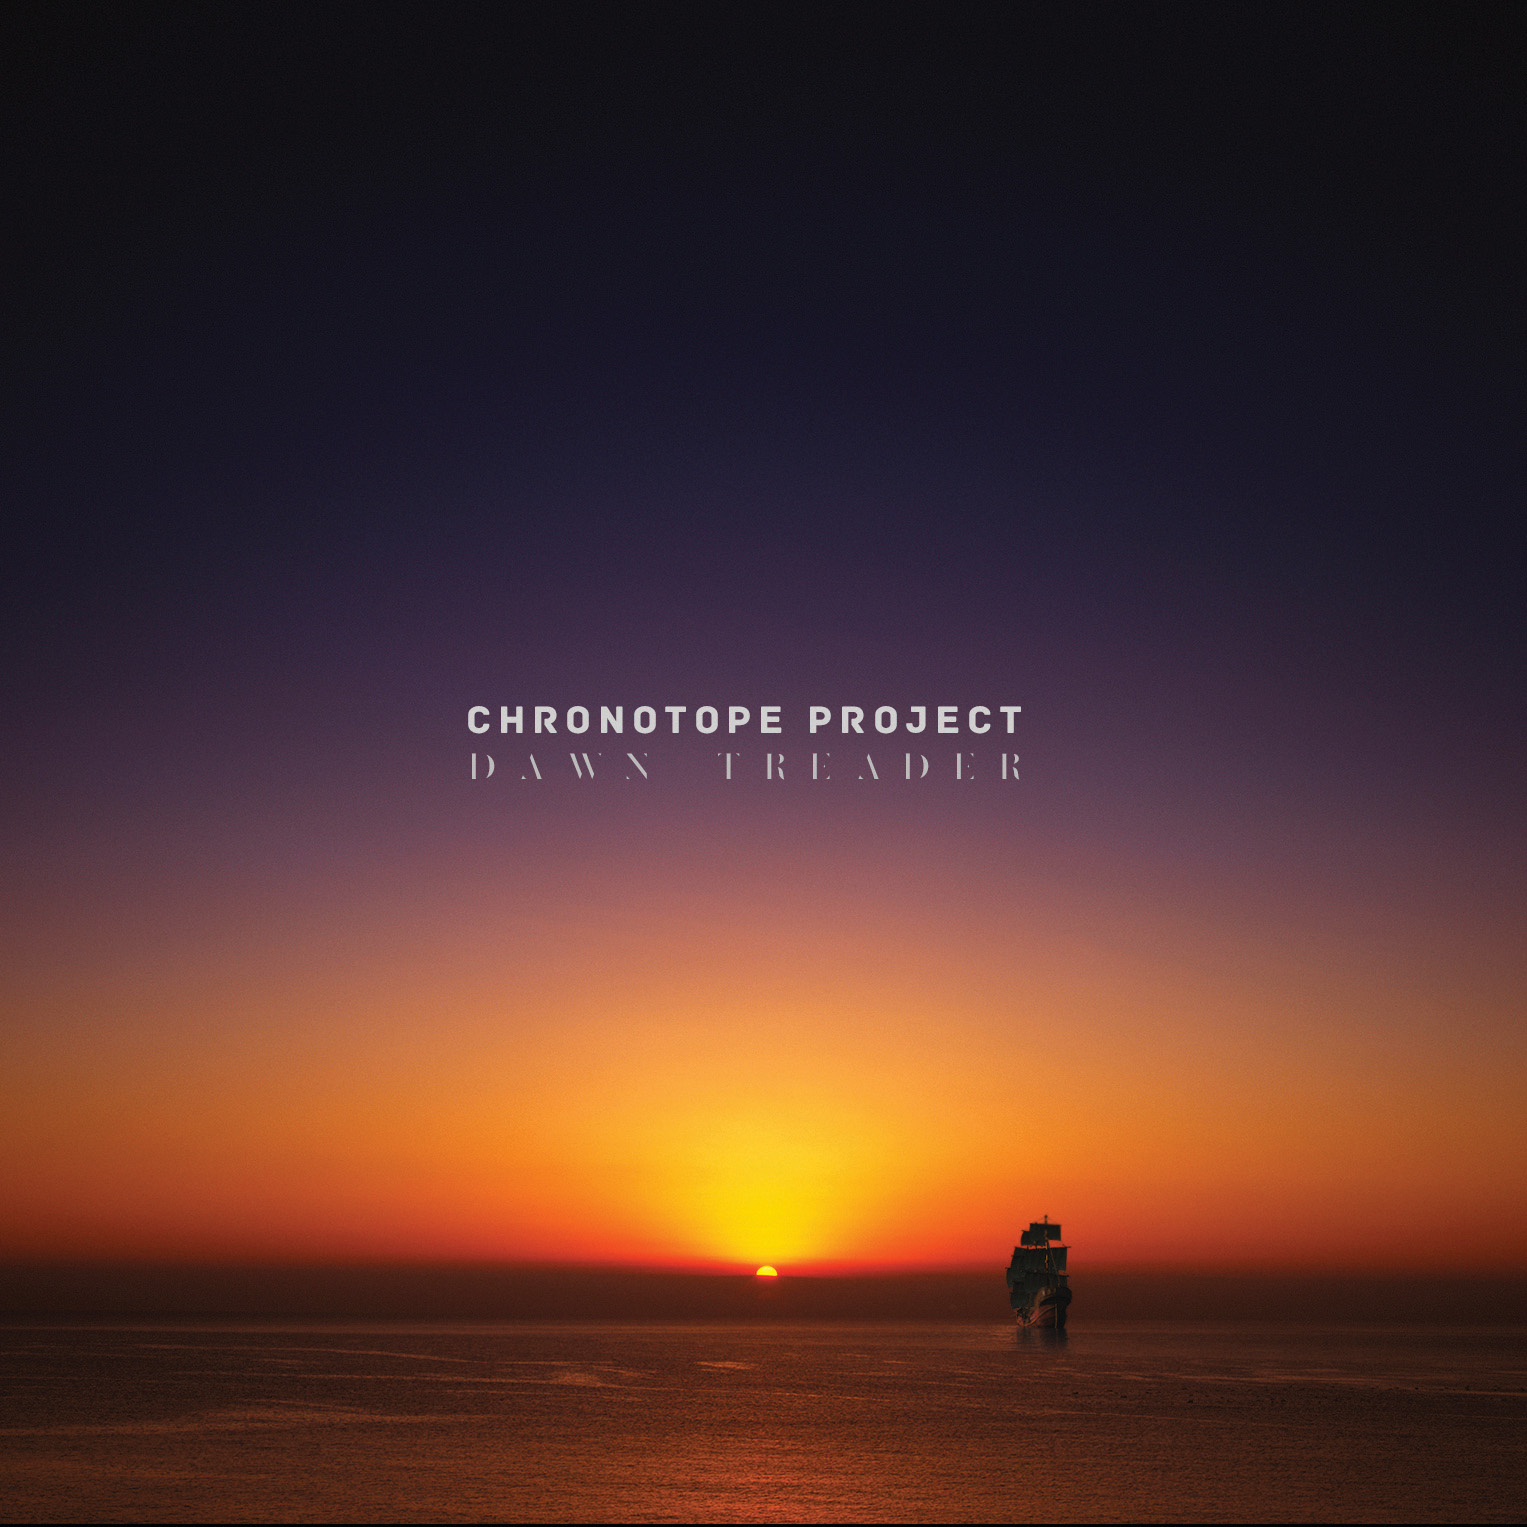 Chronotope Project - Dawn Treader (2015) [SpottedPeccary FLAC 24bit/96kHz]